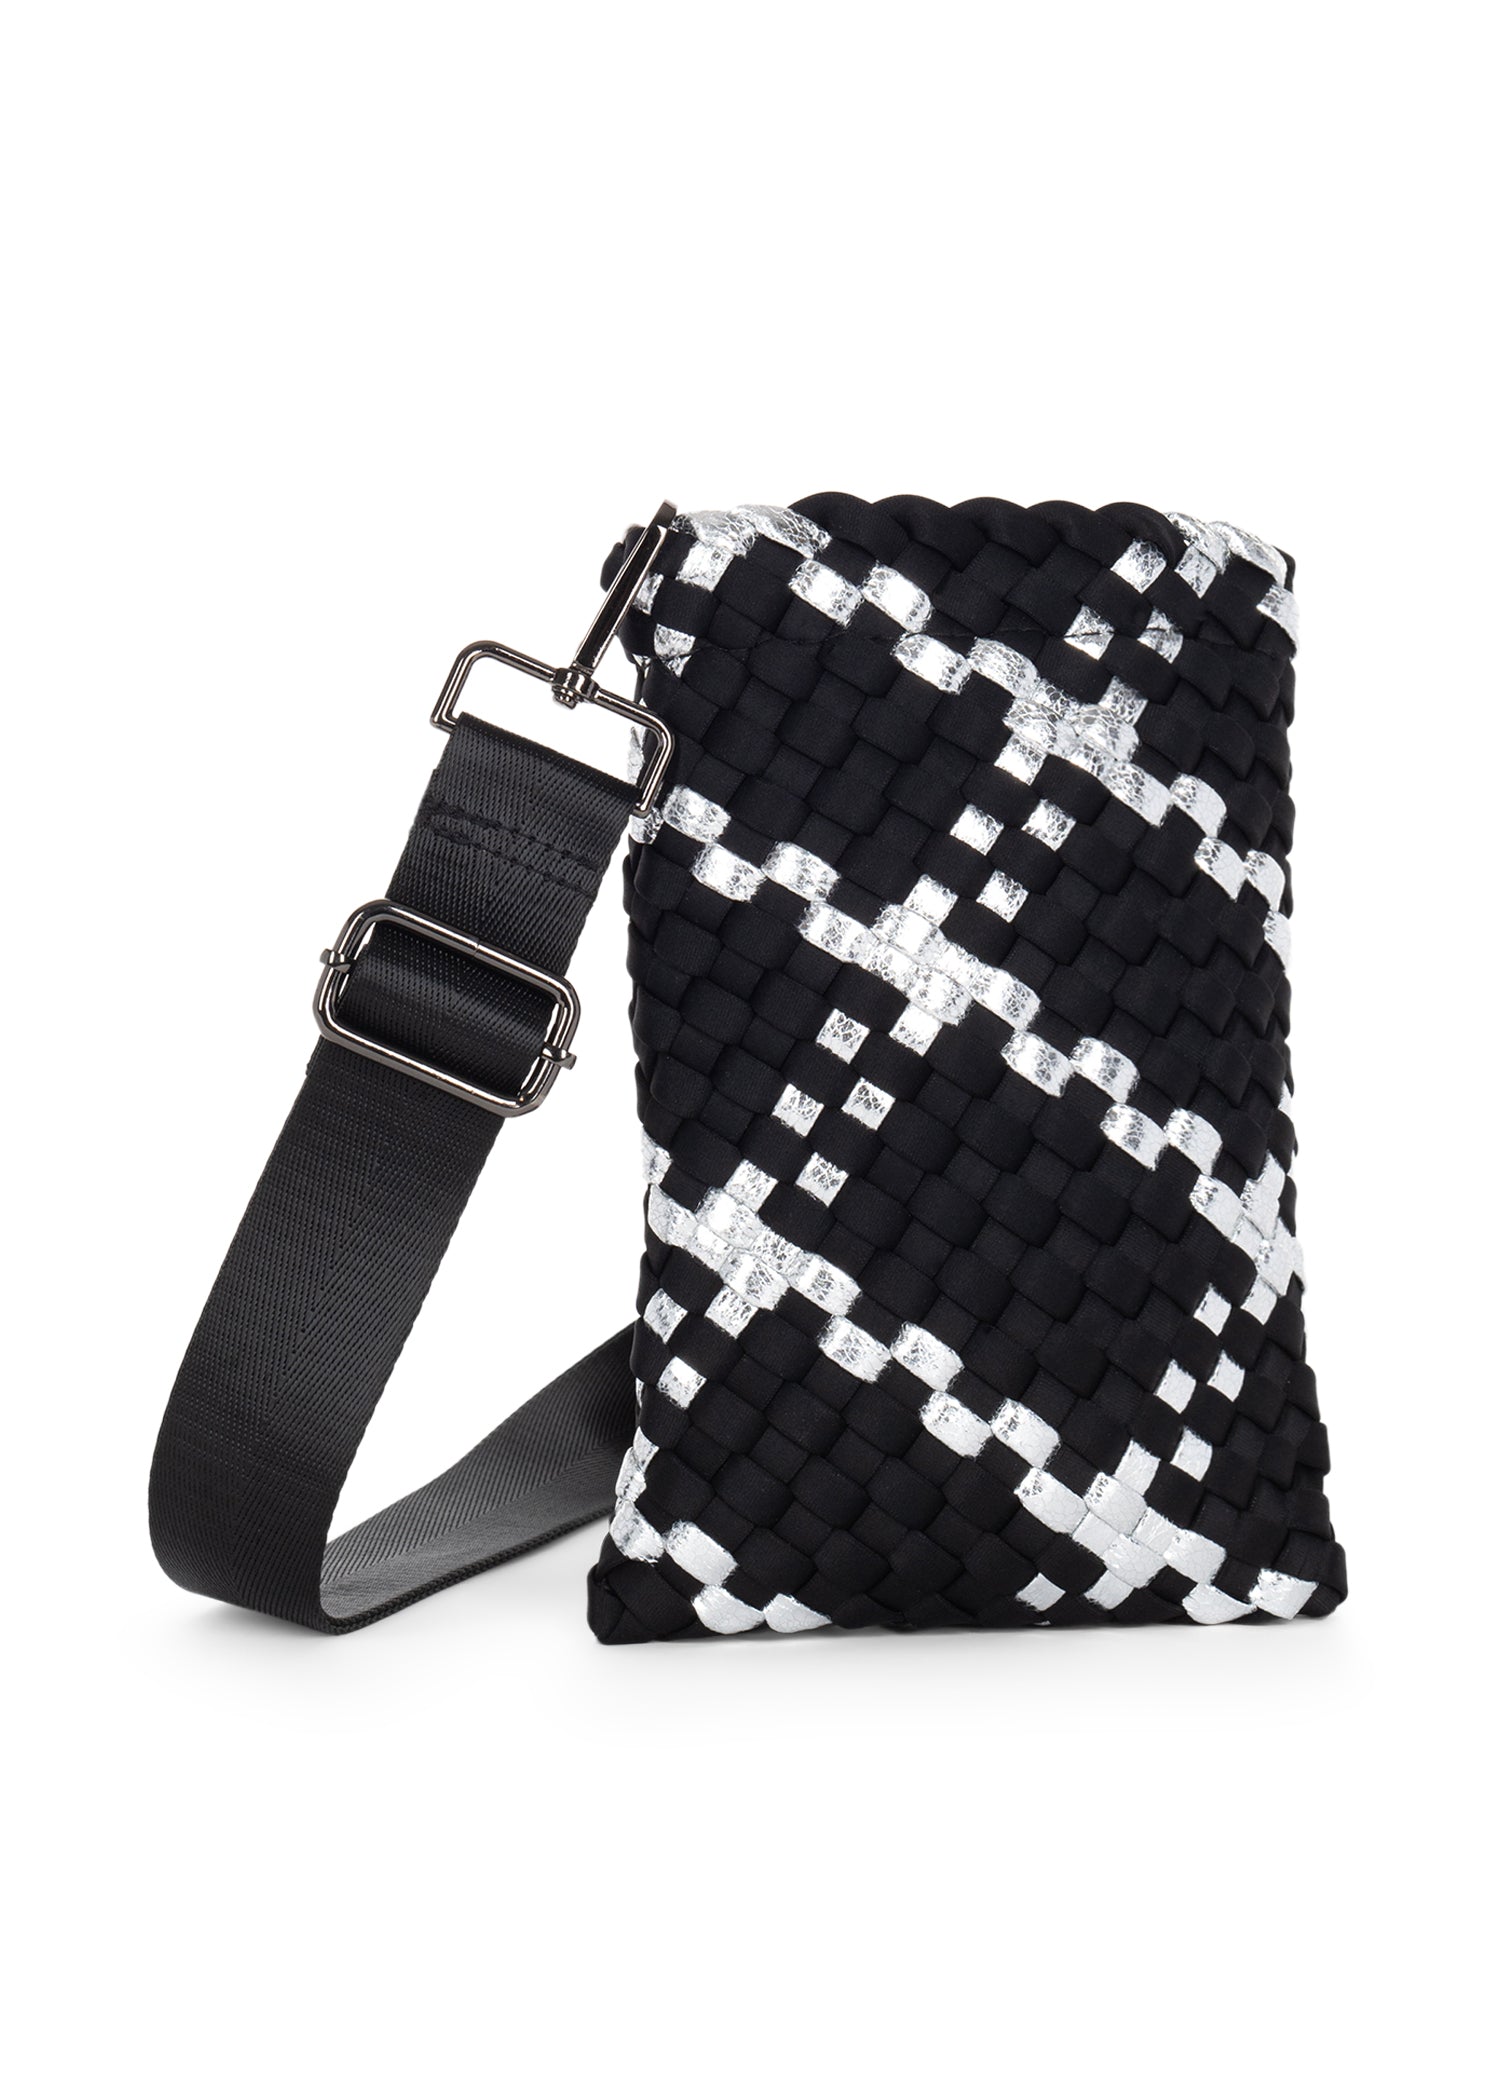 Shay Uptown Woven Phone Bag